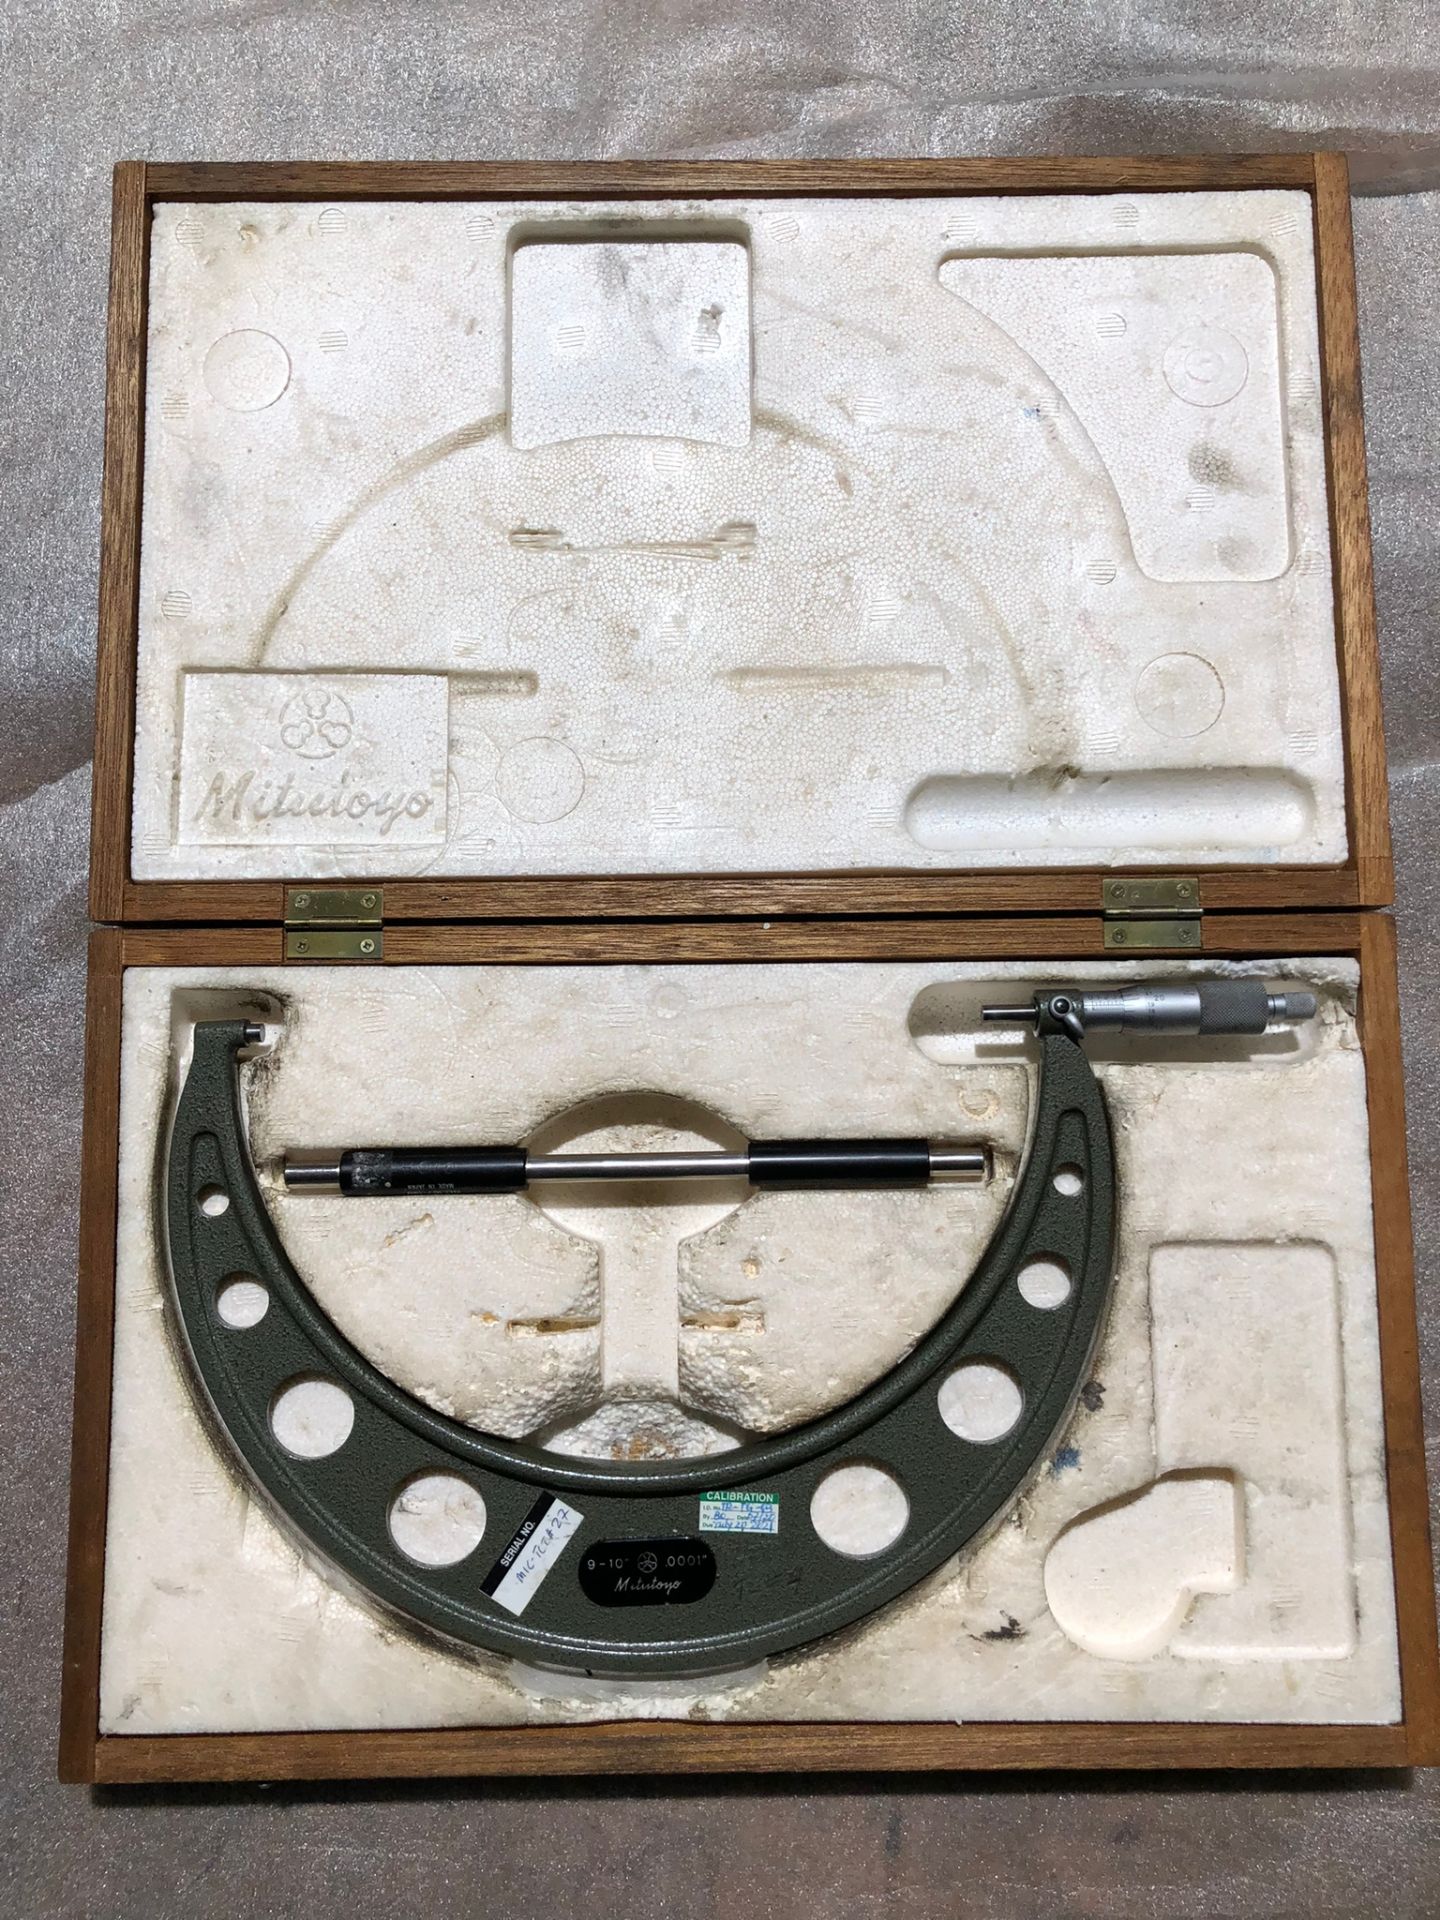 Mitutoyo 9-10" Micrometer in case with standard